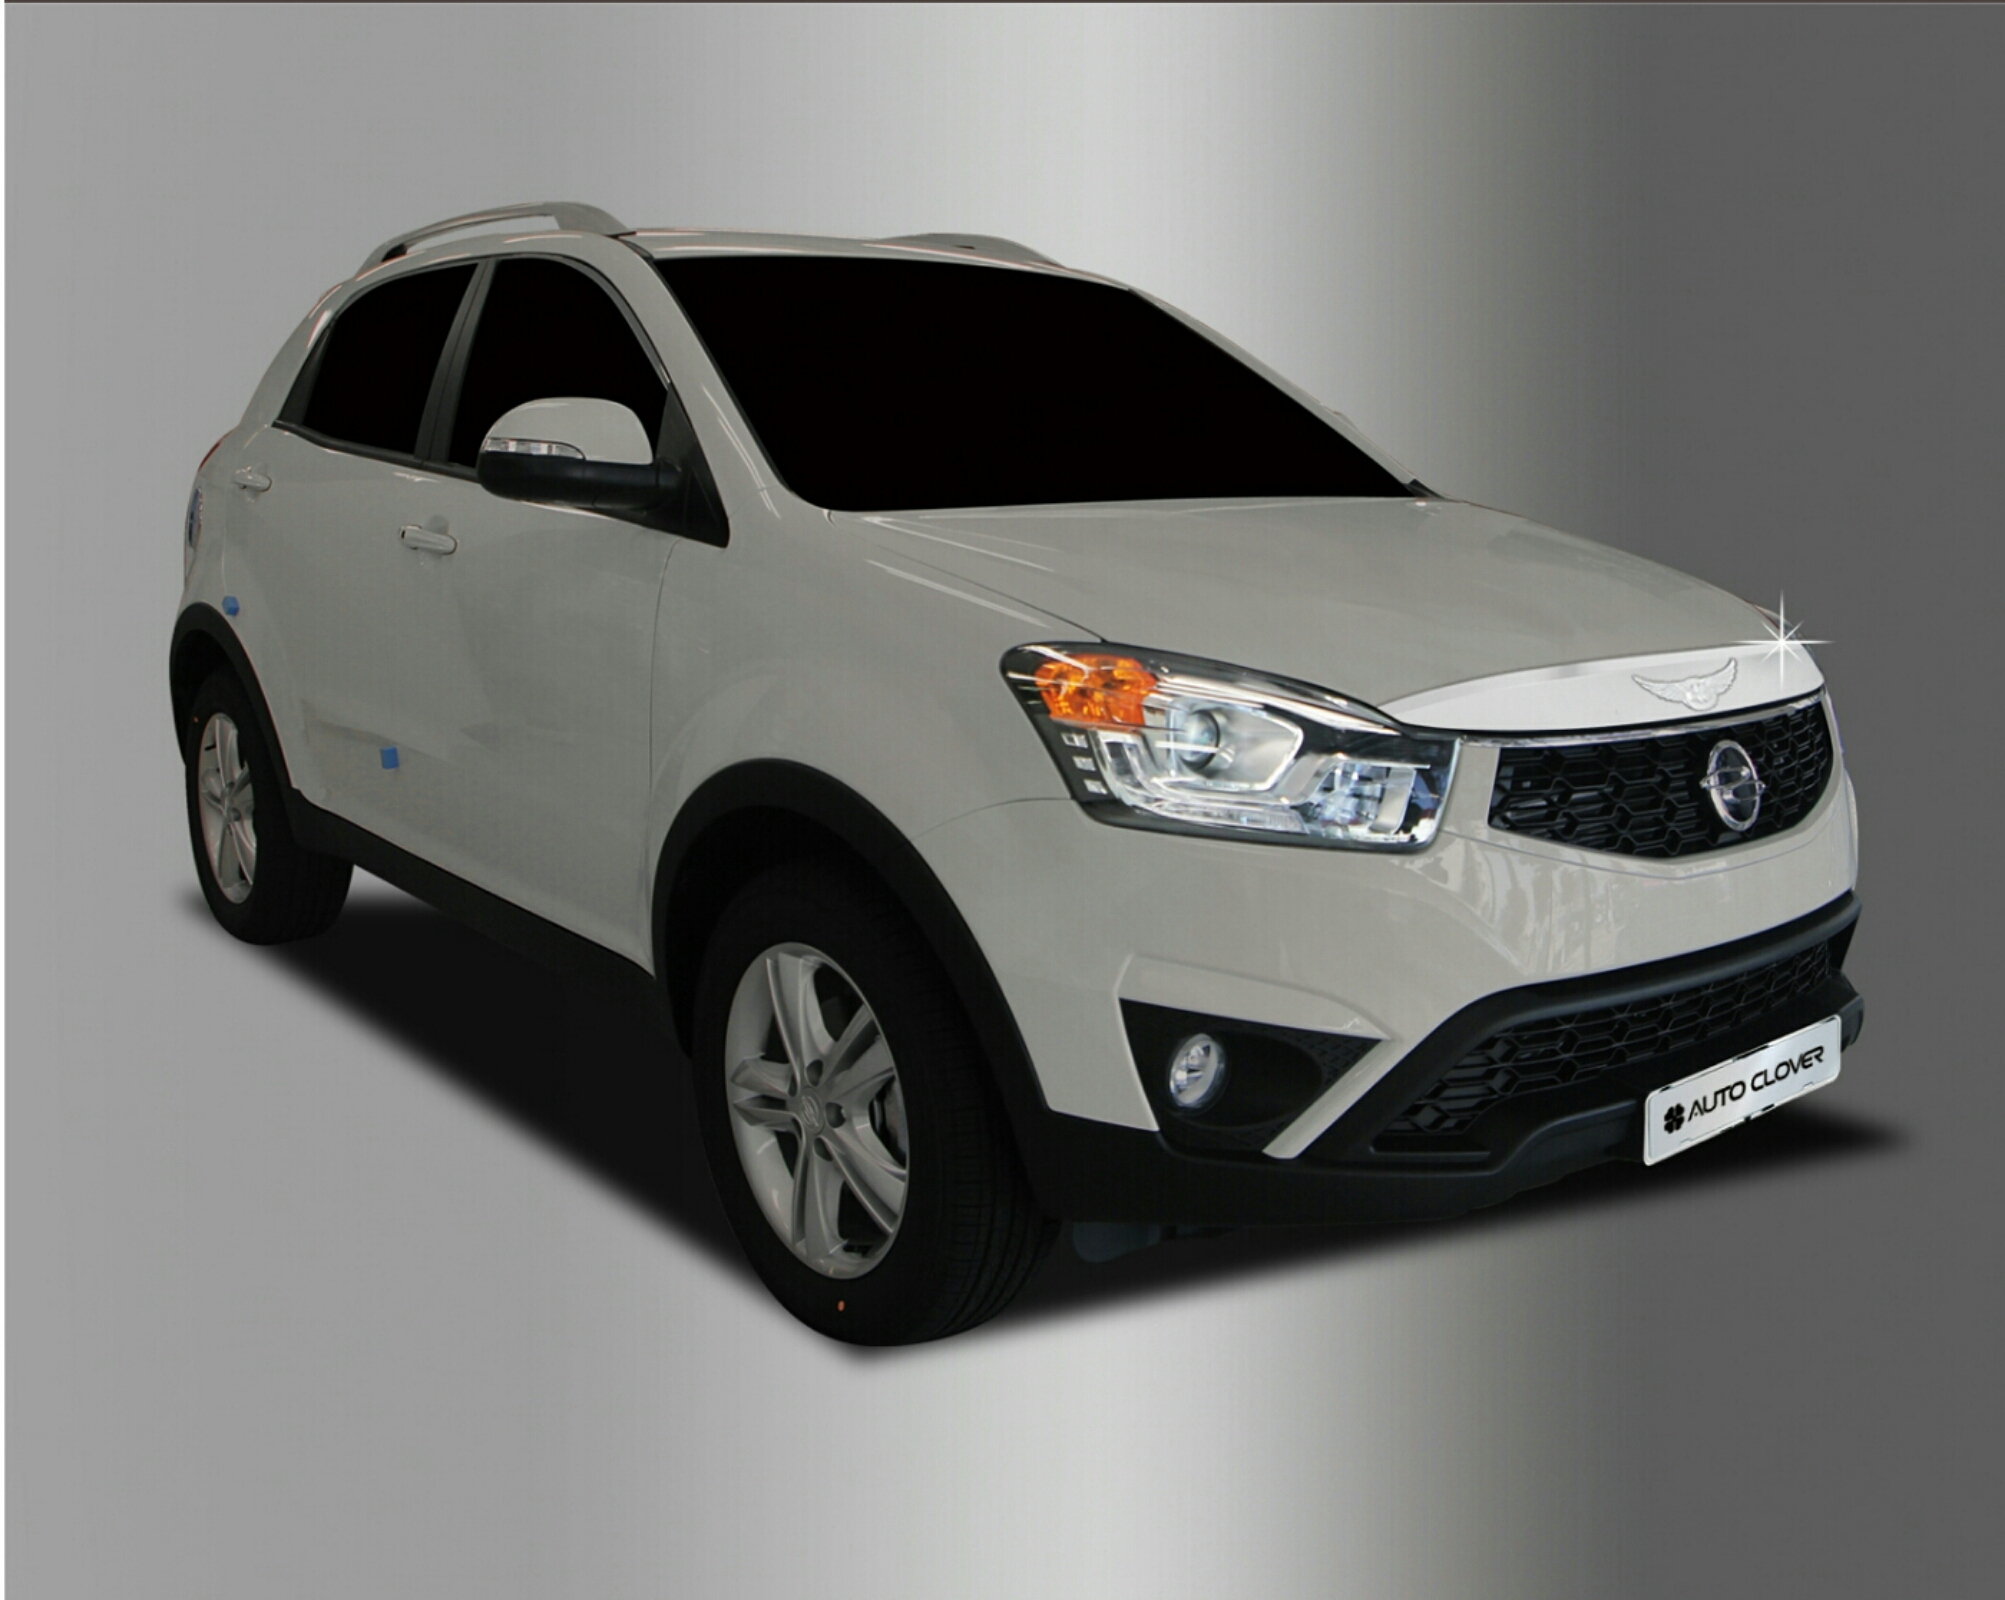 New actyon 2014. Дефлектор капота для SSANGYONG New Actyon. Саньенг Актион 2014. Дефлектор капота ССАНГЙОНГ Актион 2012. Дефлектор капота SSANGYONG Actyon New 2012.